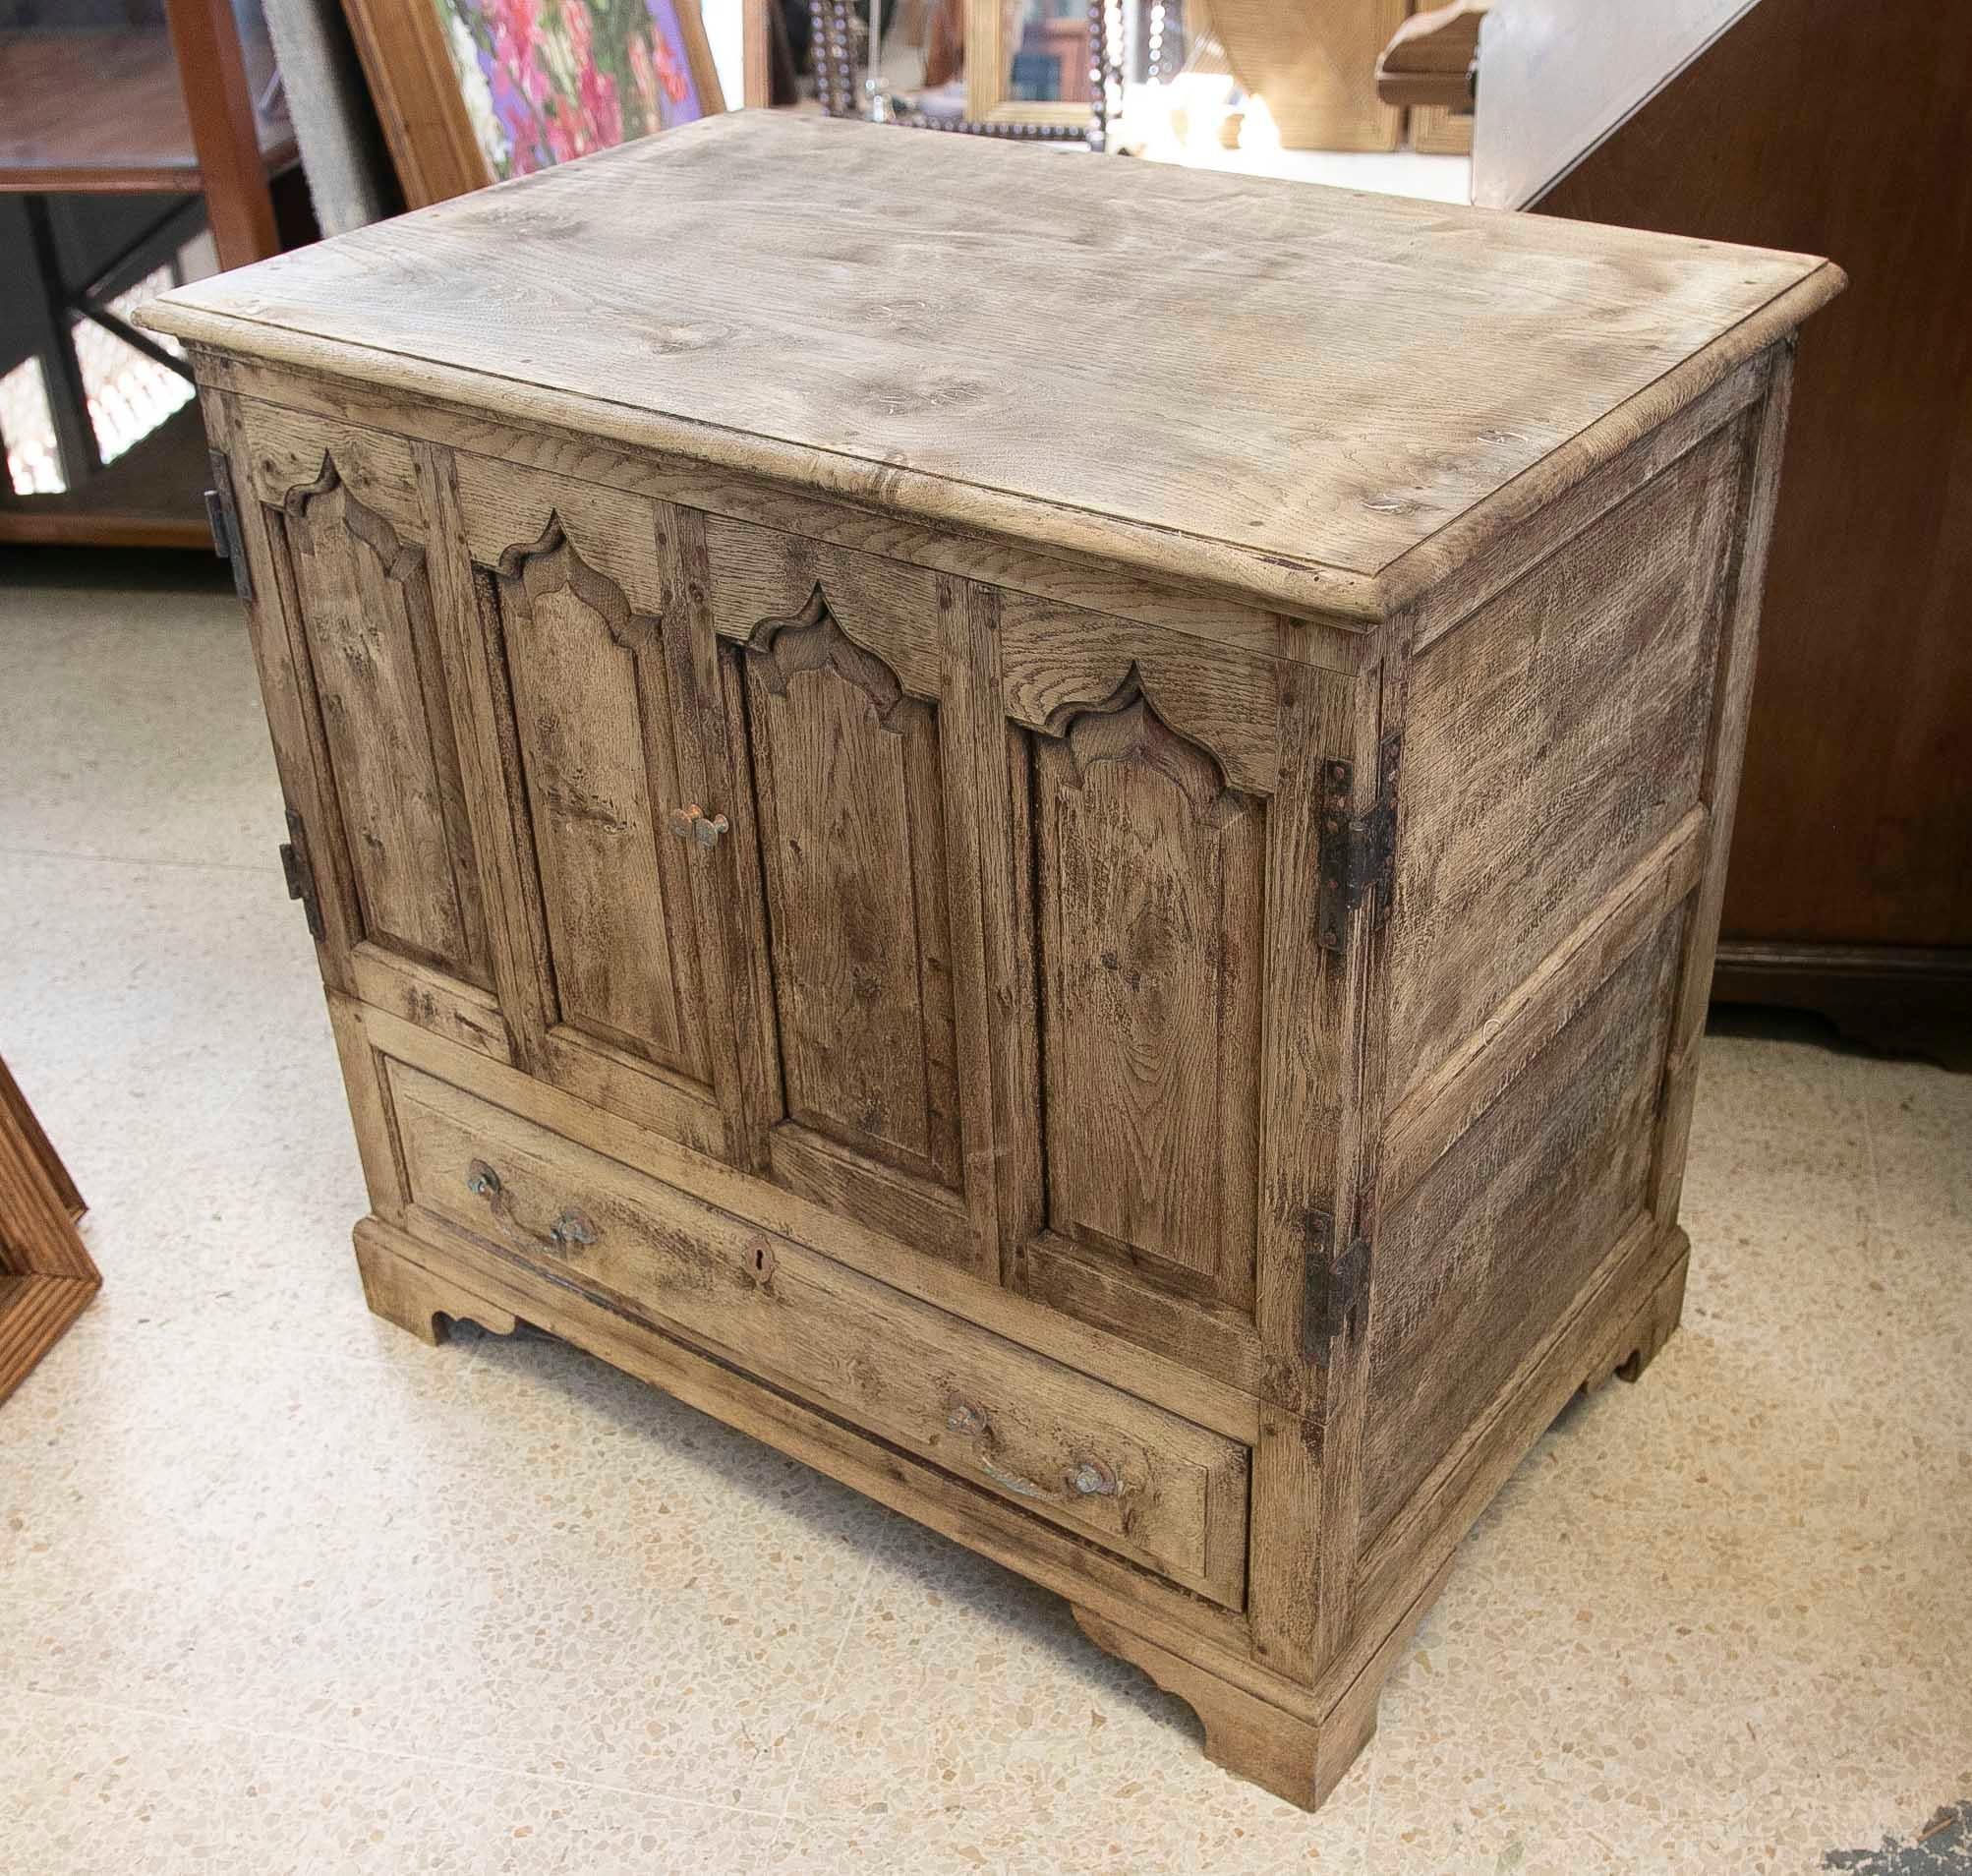 19th Century English Furniture with Doors and Drawer in the Tone of its Wood For Sale 2